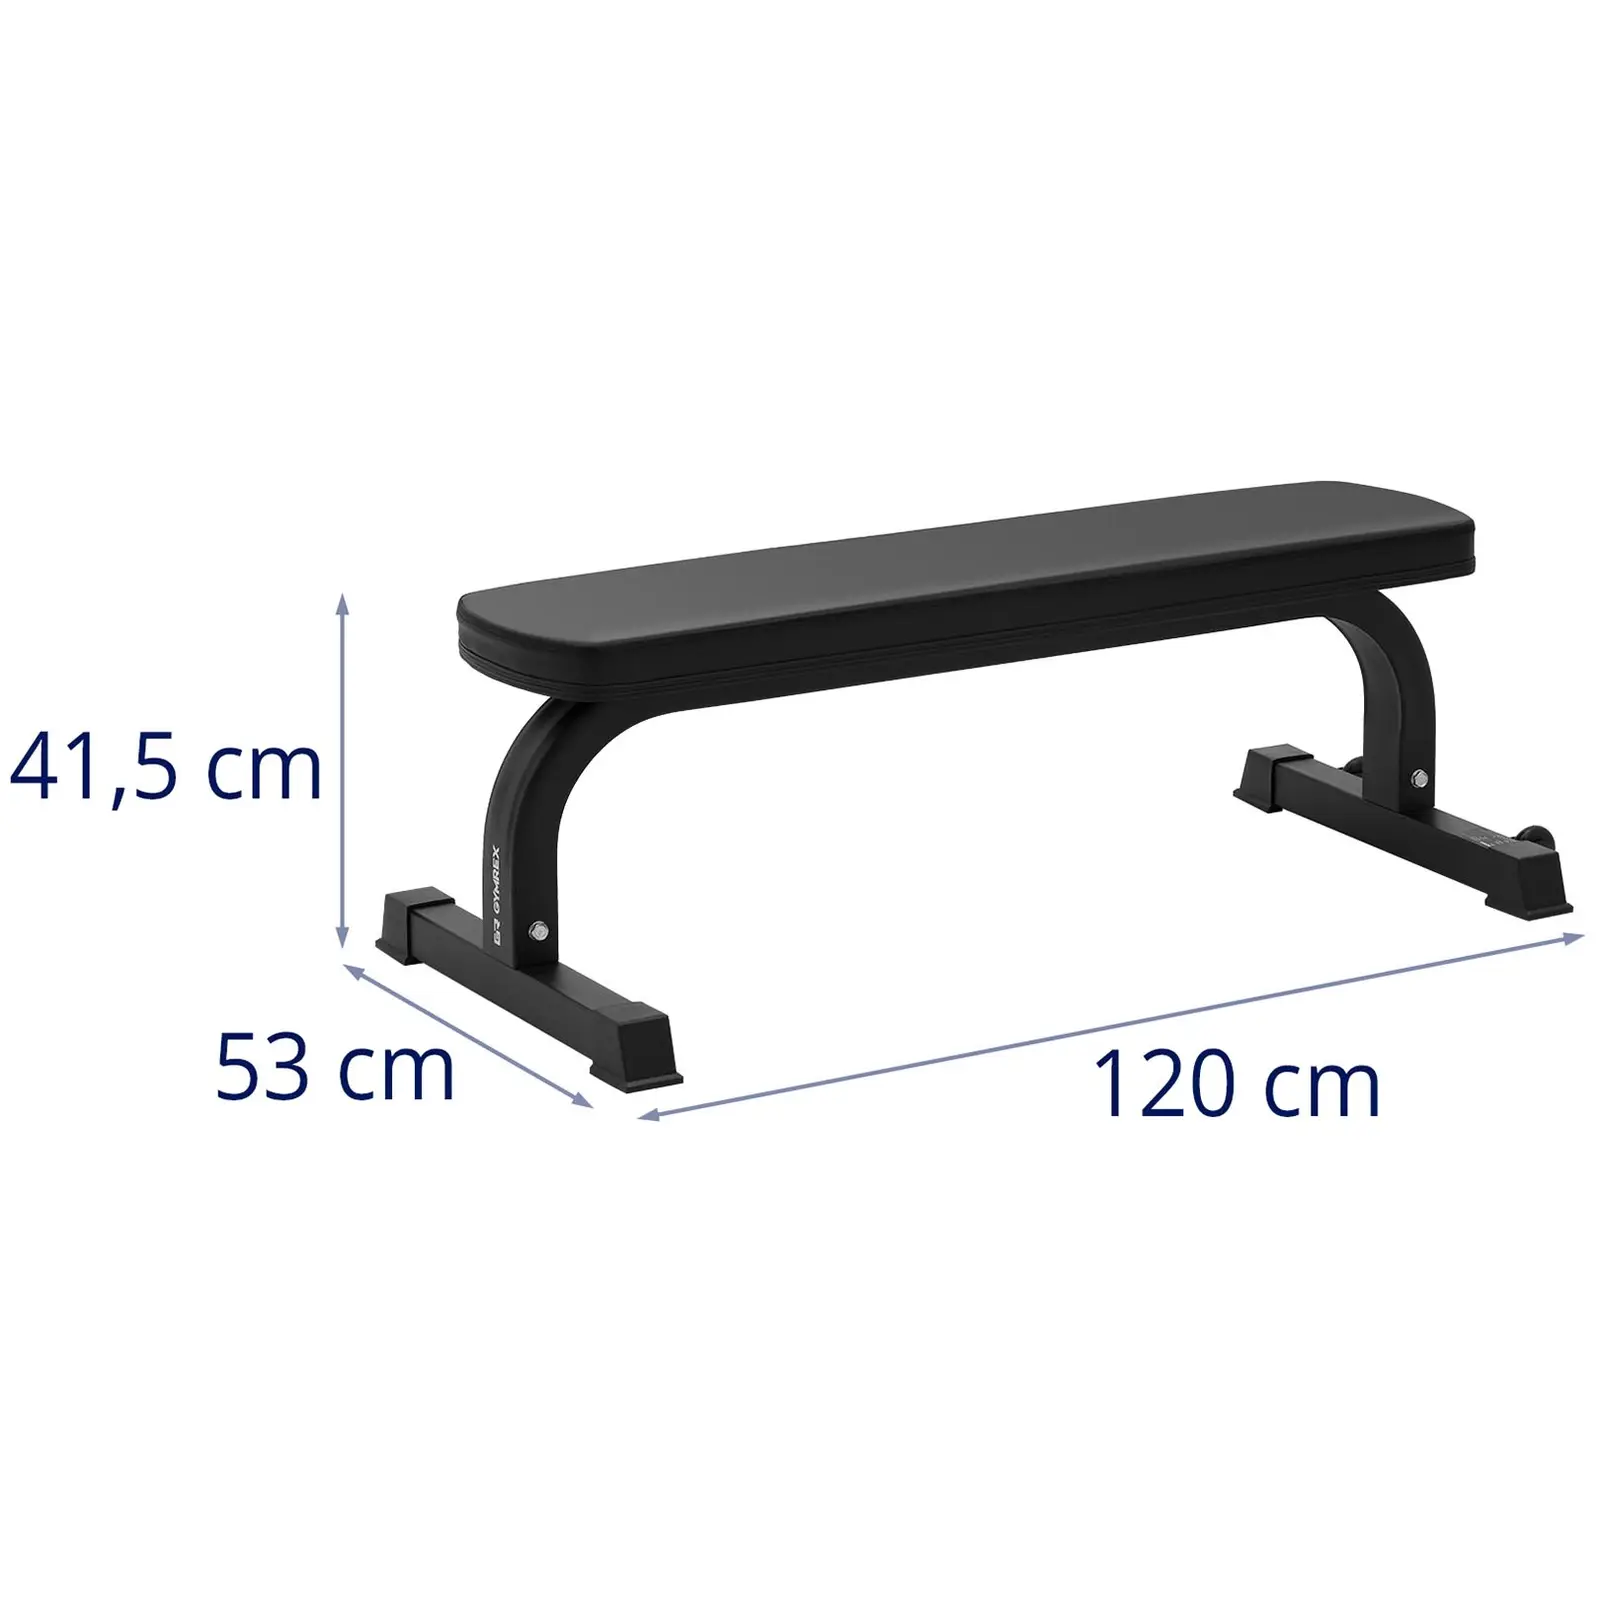 Flat Bench - up to 150 kg - 1110 x 285 mm